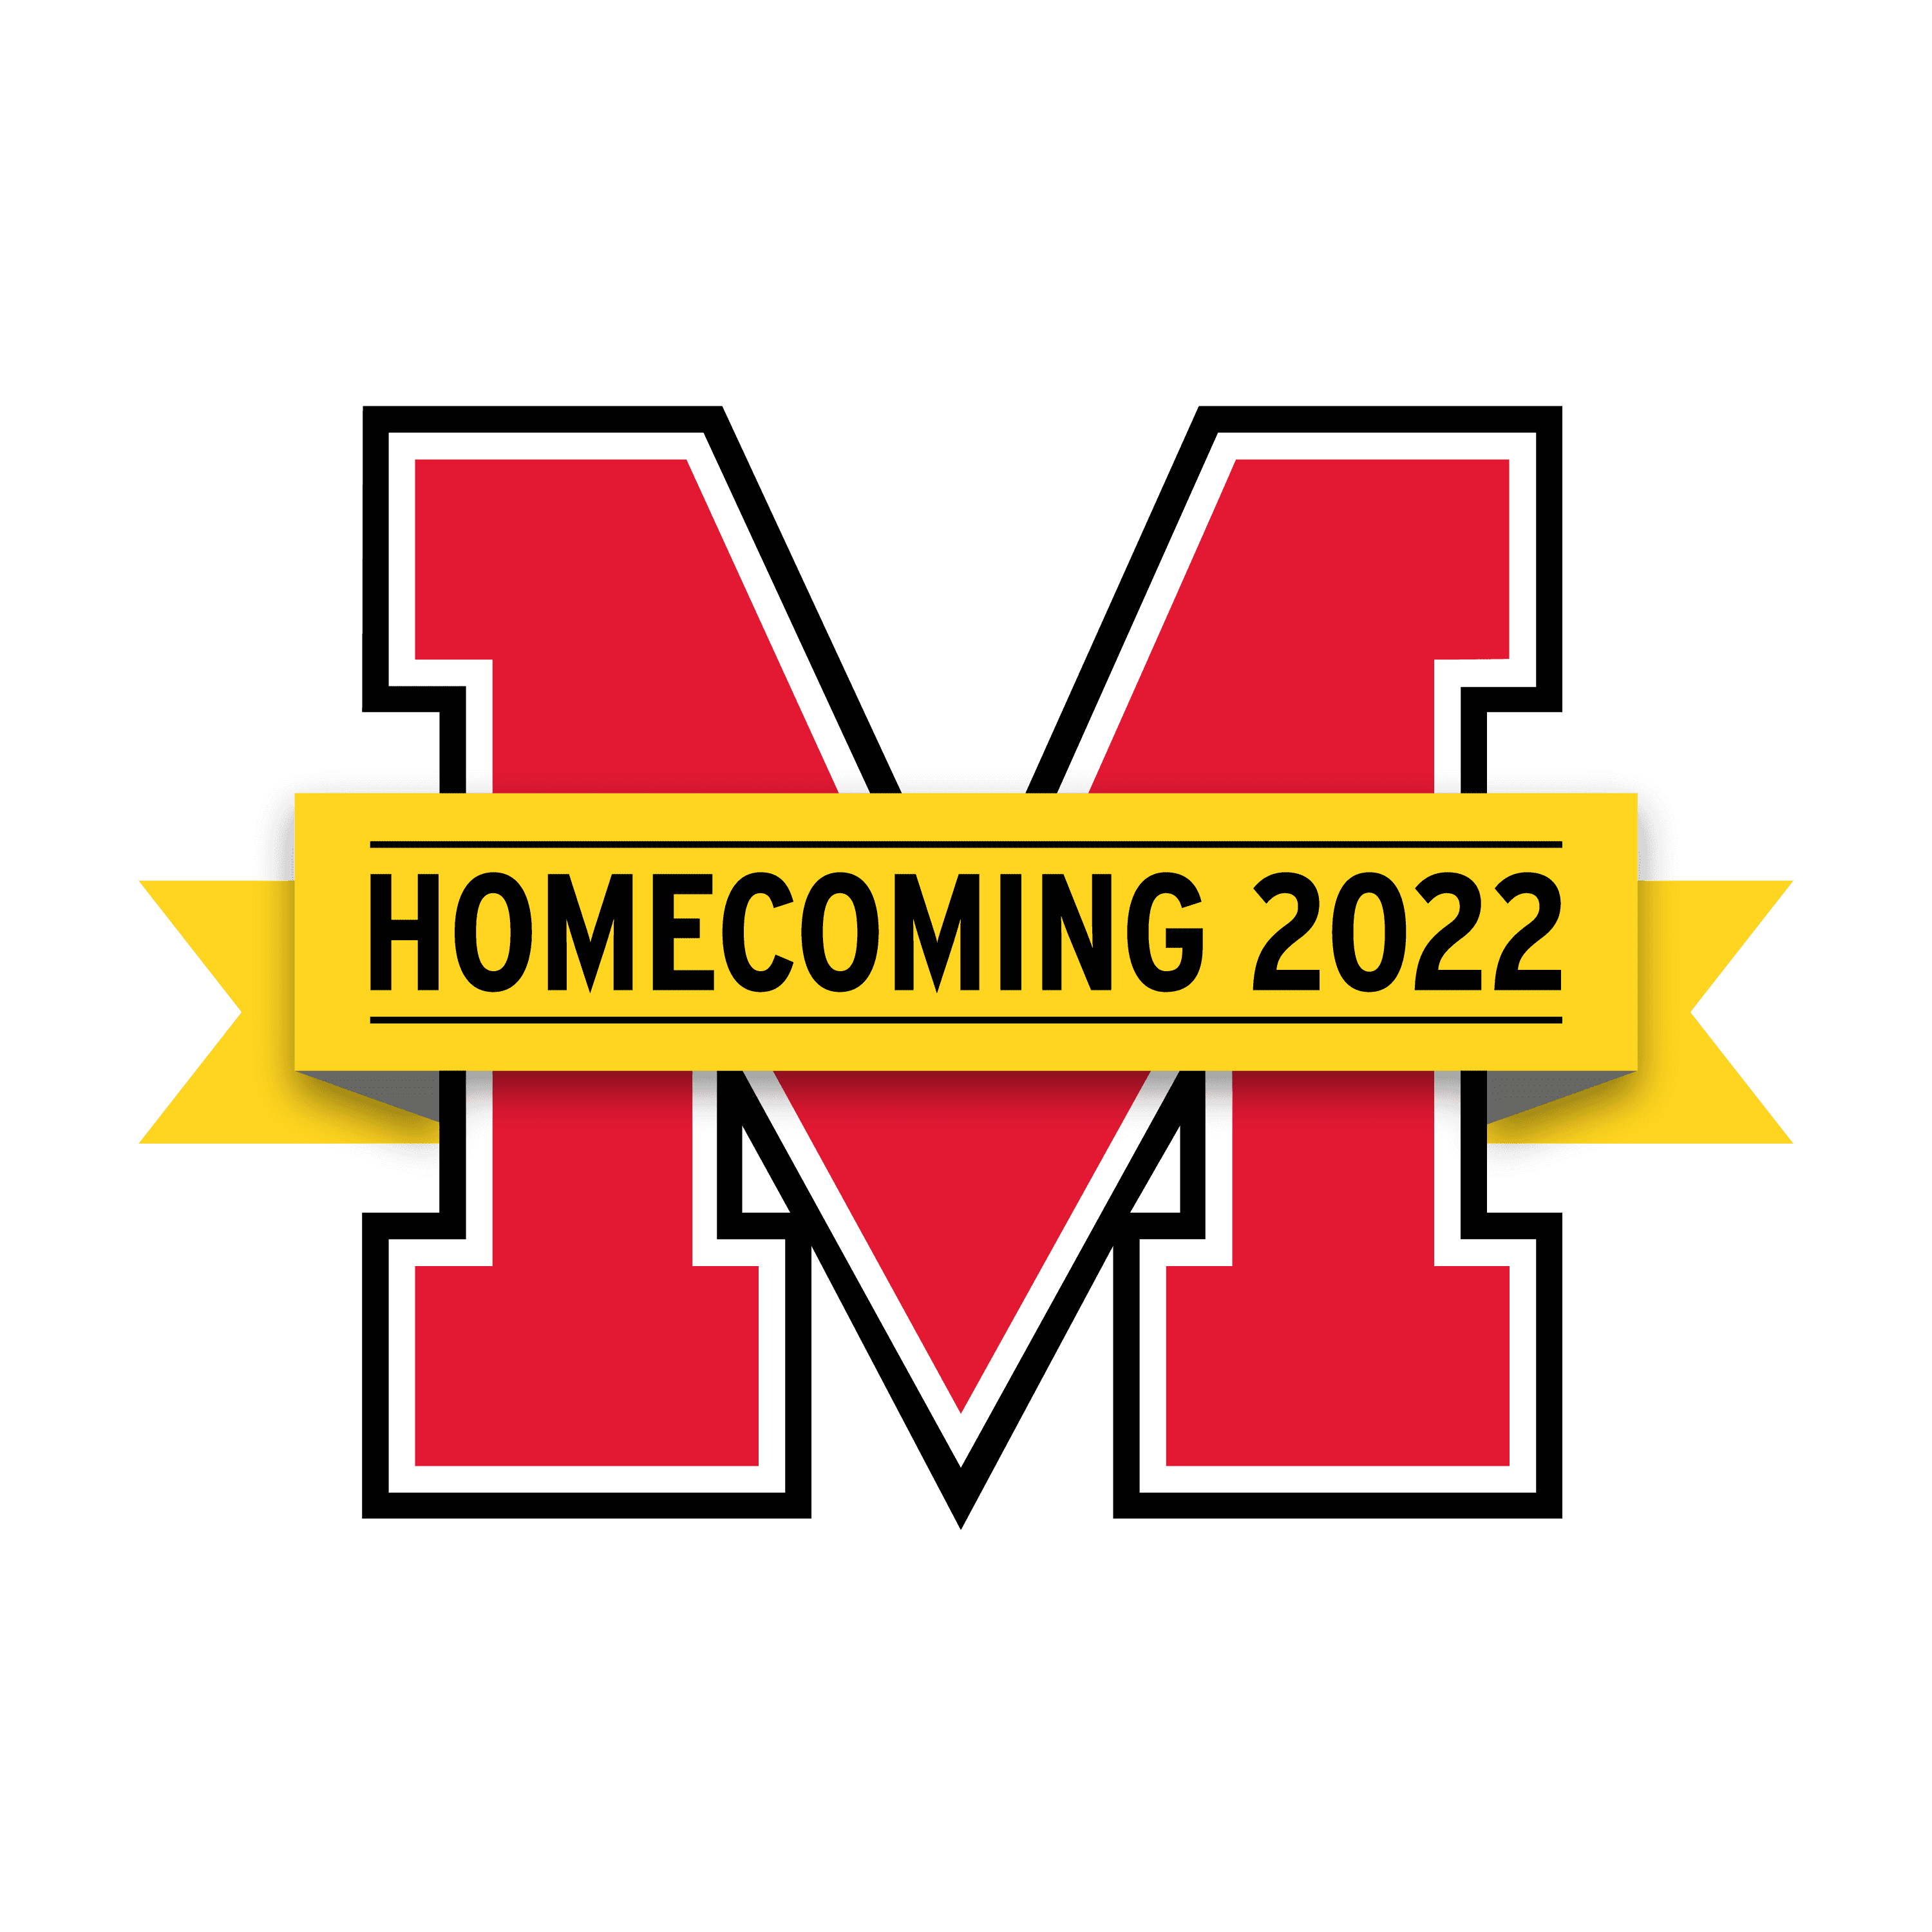 Red M with yellow banner across that reads "Homecoming 2022"